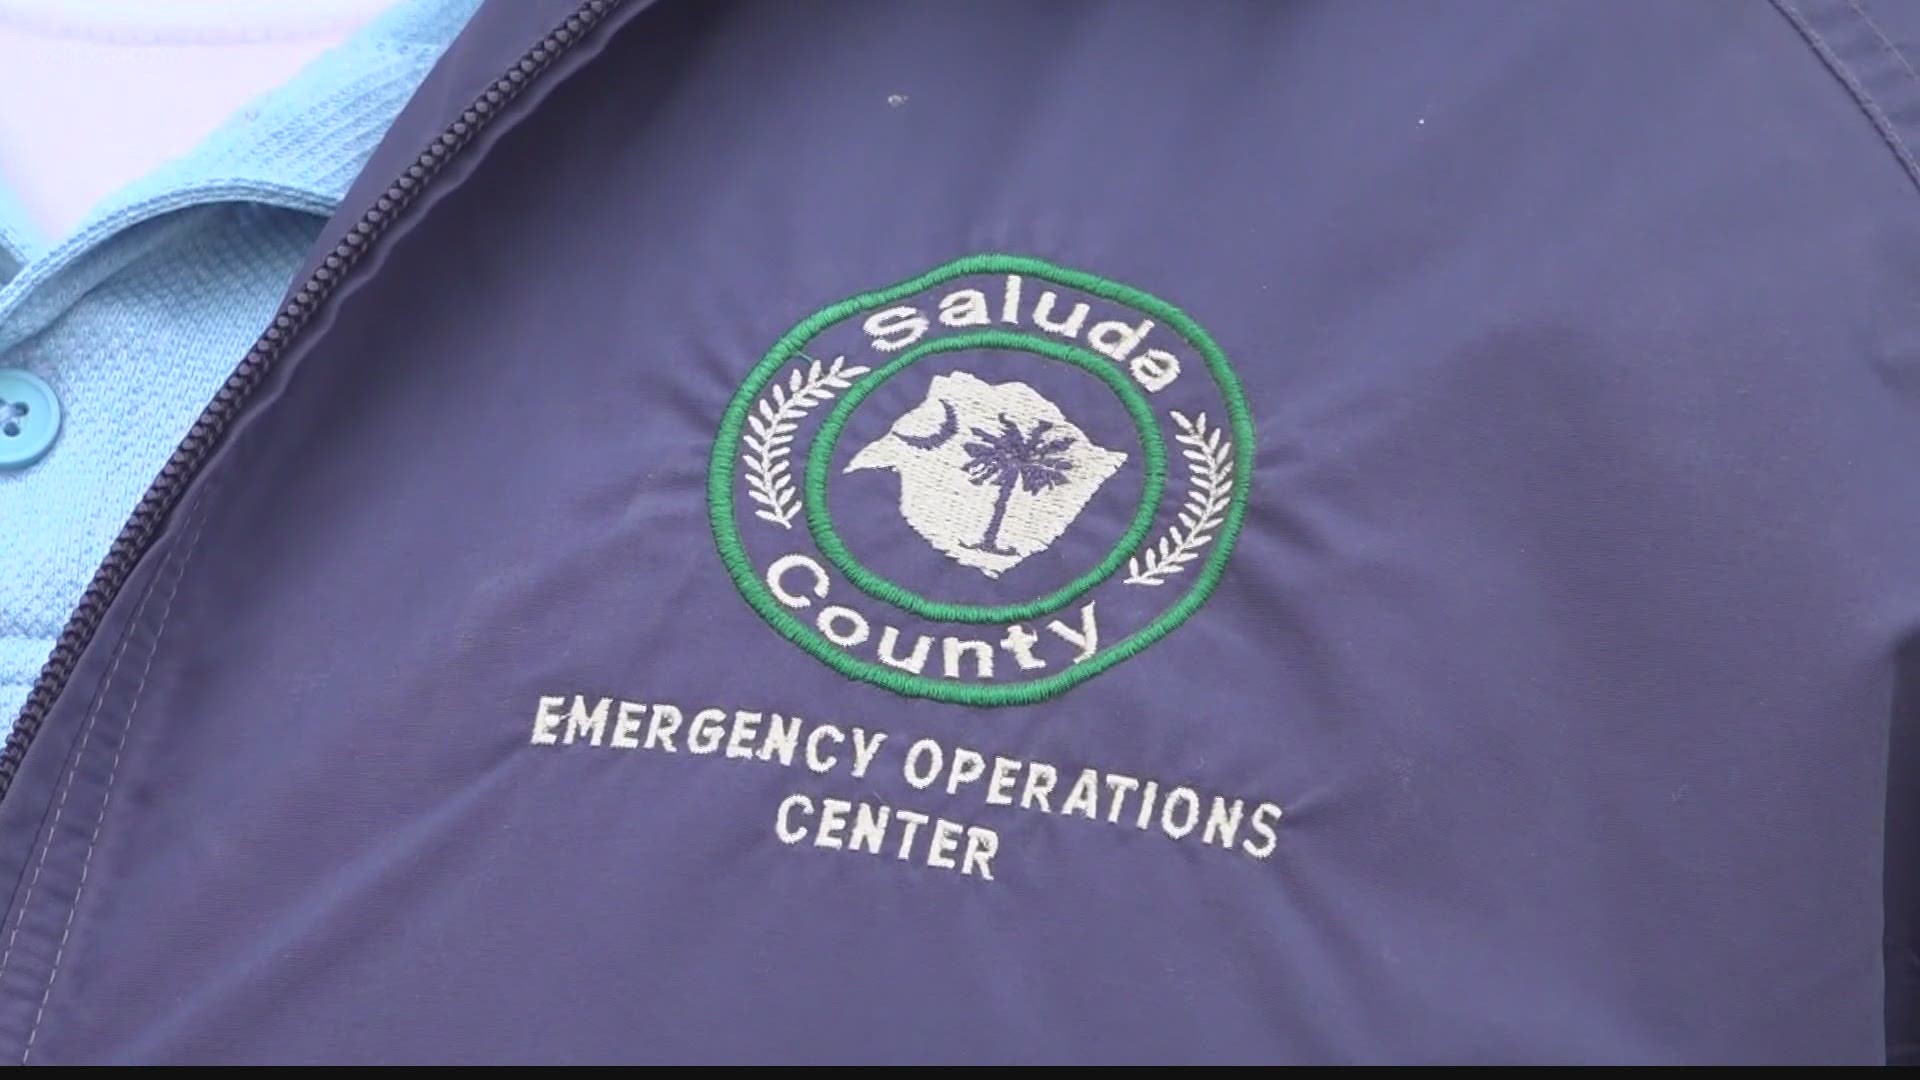 More than 700 people have been vaccinated in Saluda County.